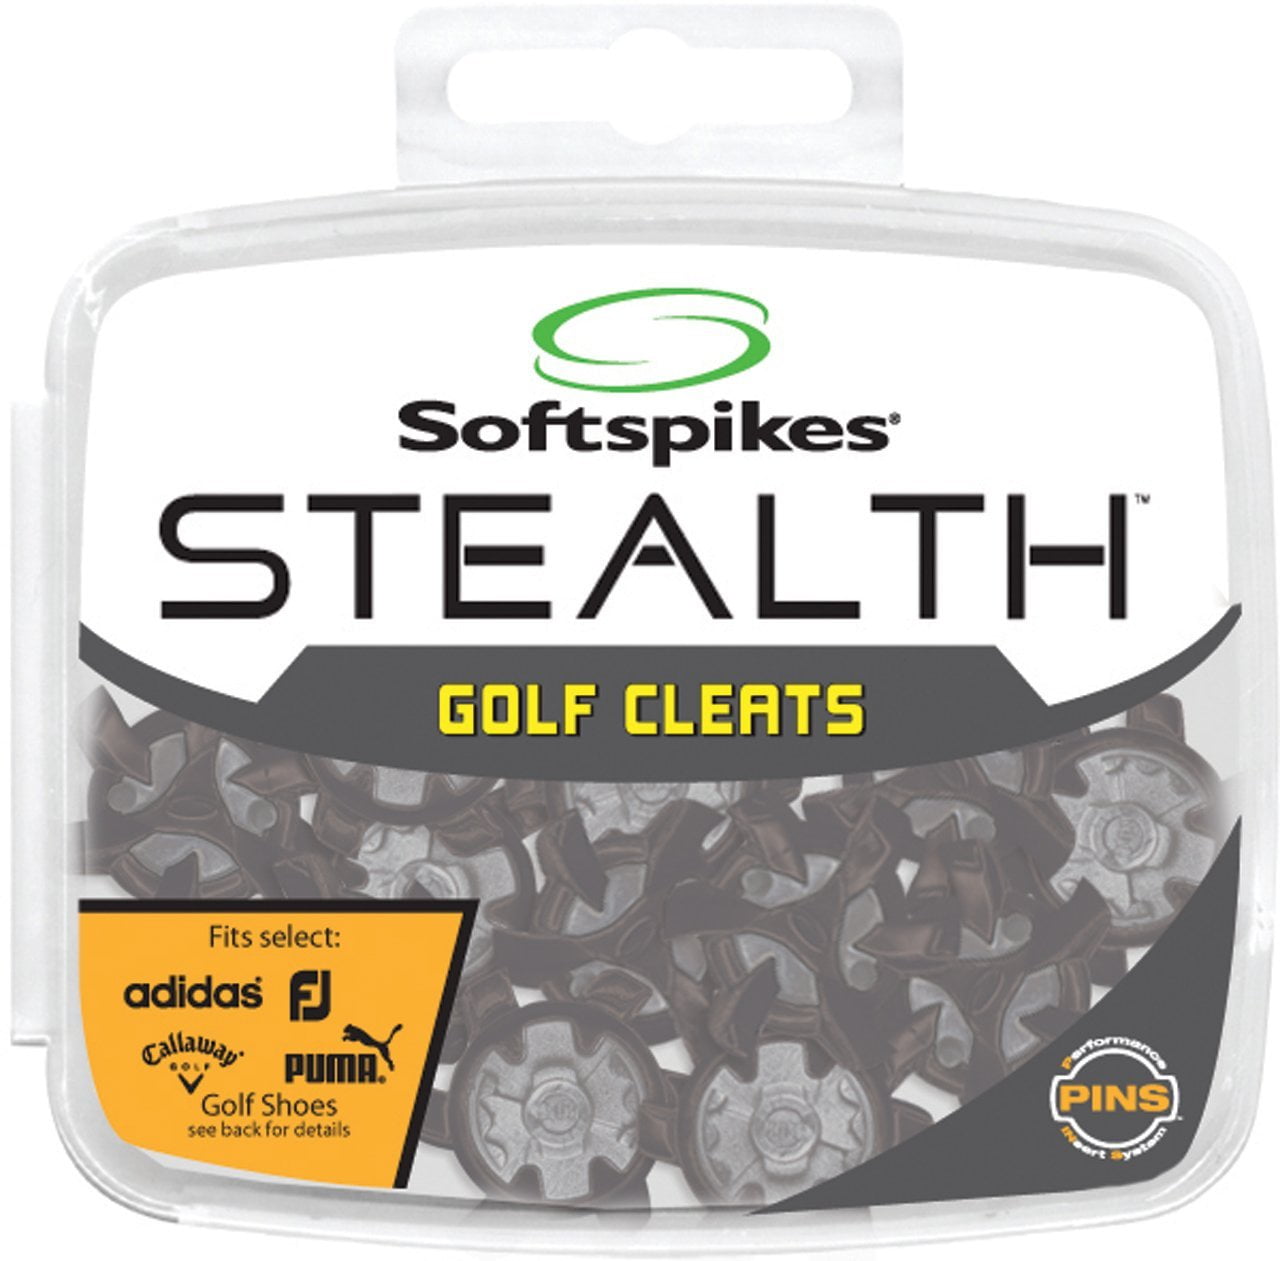 Softspikes Stealth PINS Golf Cleats (20 